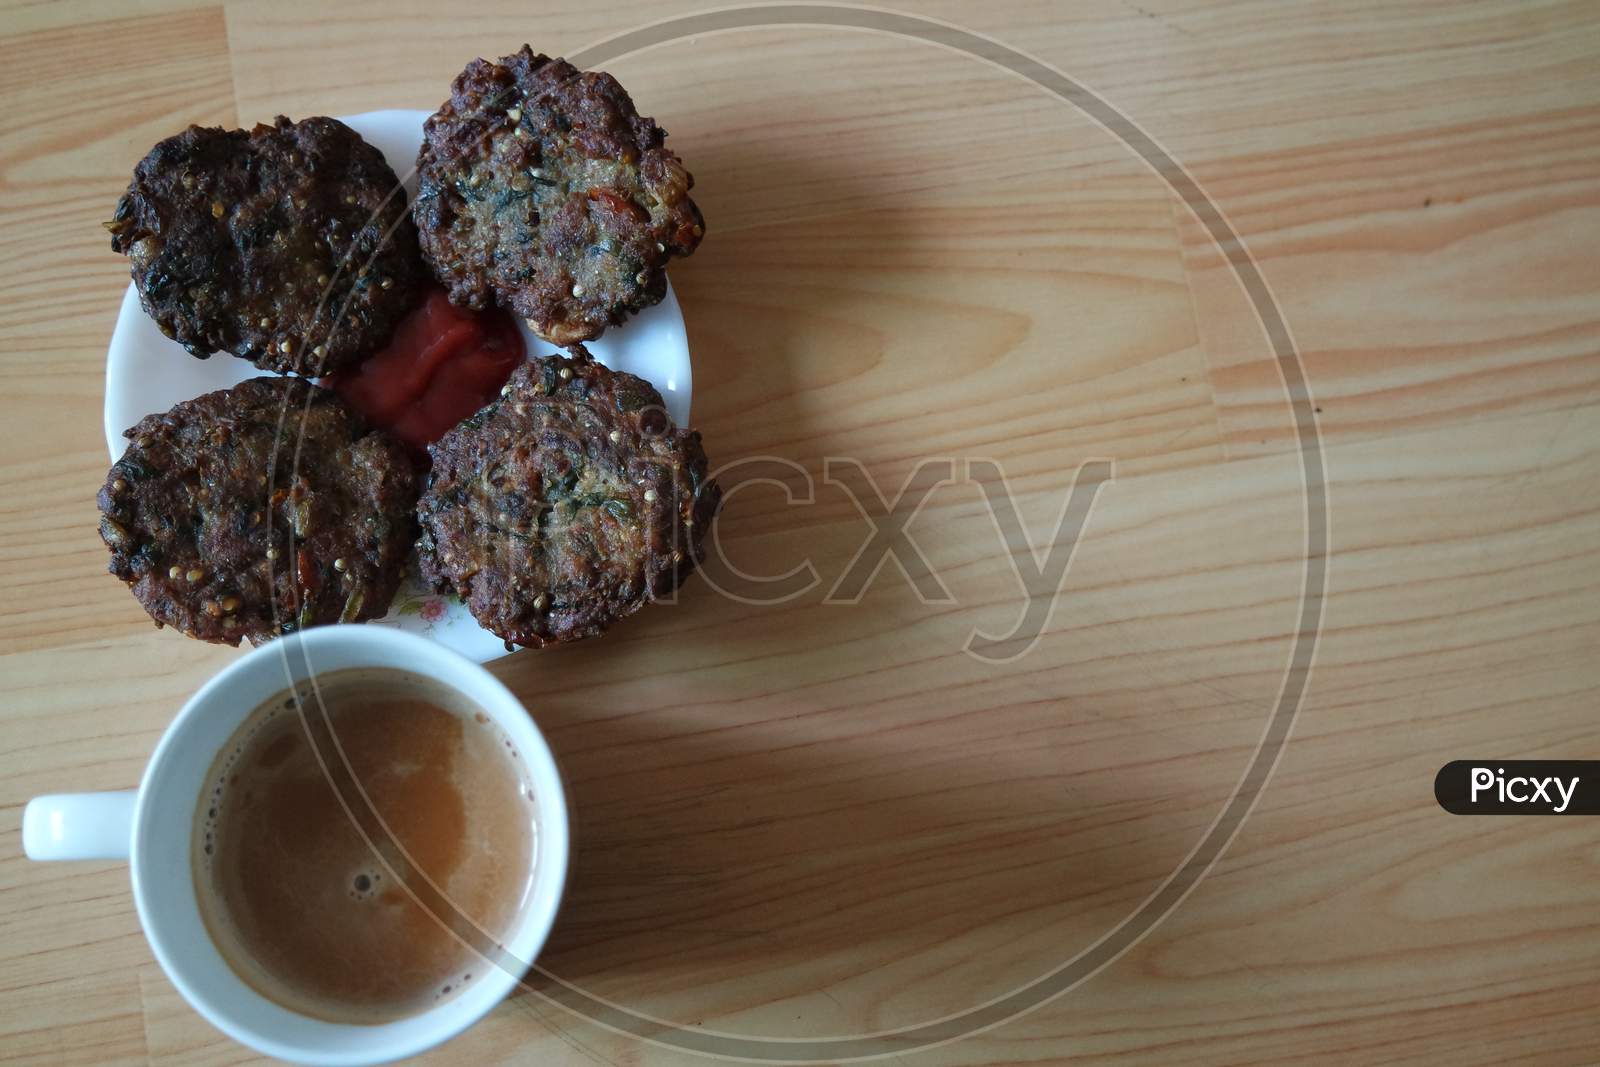 Delicious Spicy Fried Round Kebab Served In White Plate With Cup Of Hot Tea.